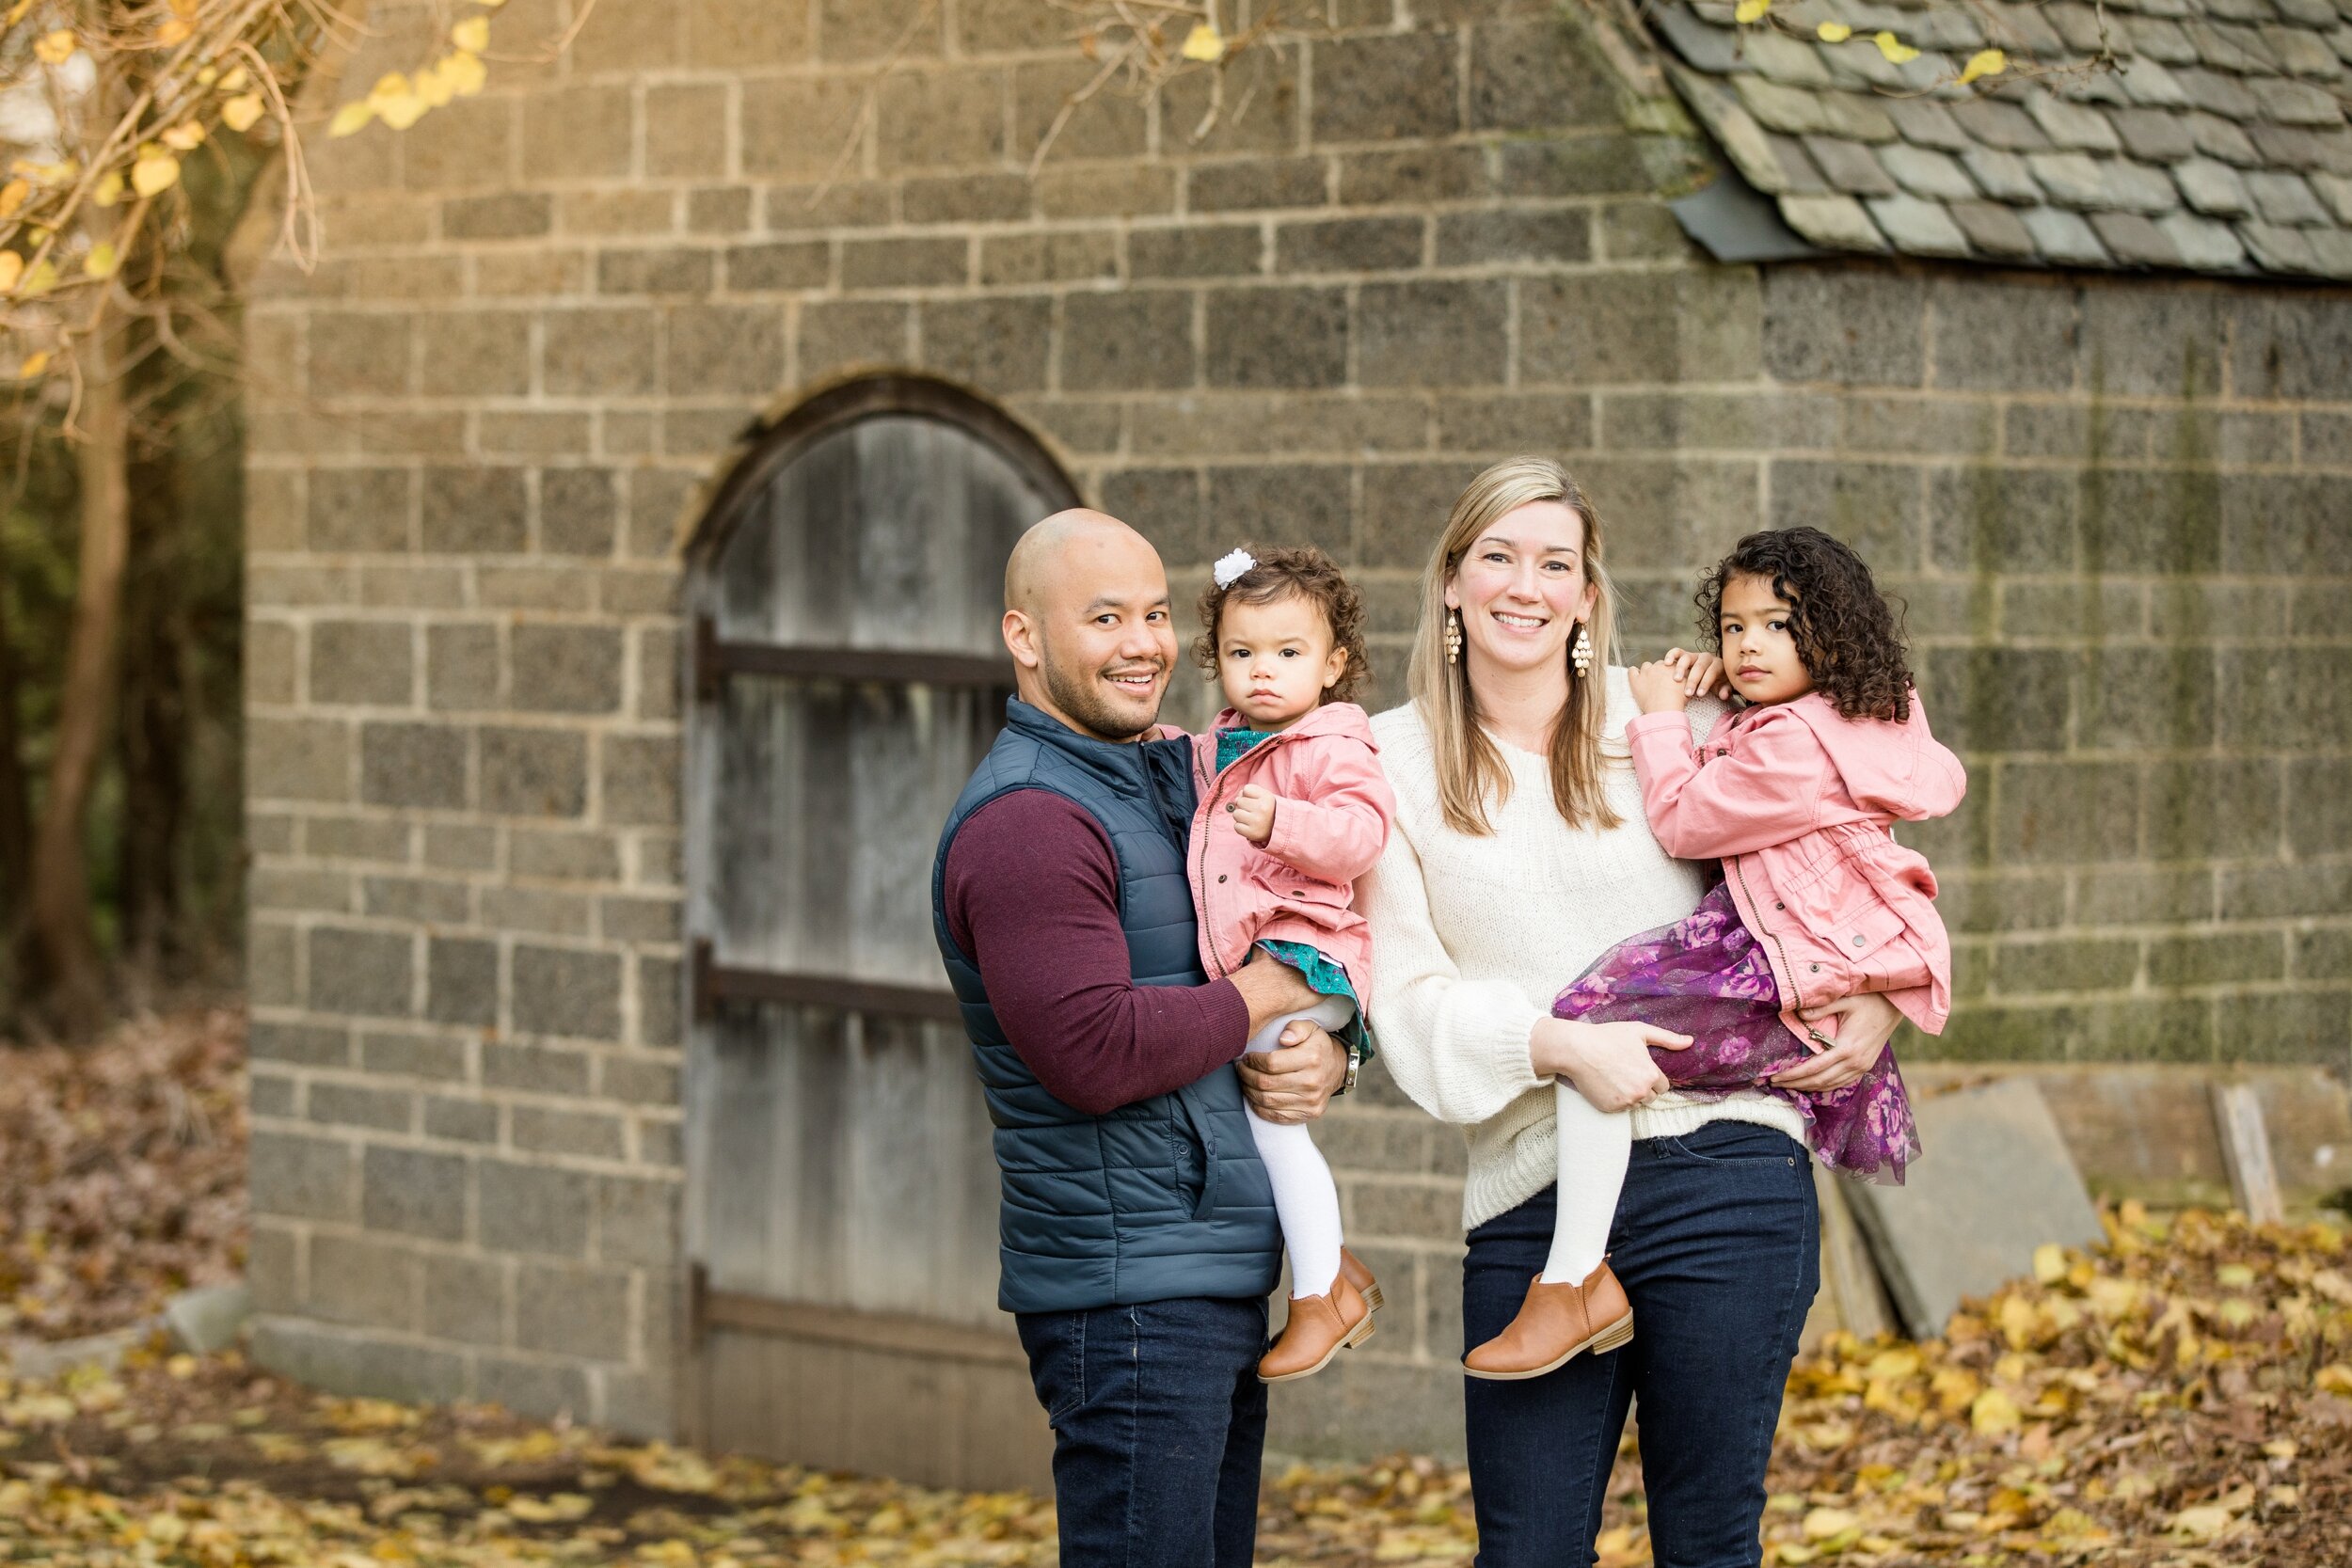 winter photoshoot outfit ideas, winter photoshoot location ideas pittsburgh, winter photoshoot outfits family, winter photoshoot ideas, winter photo shoot couples